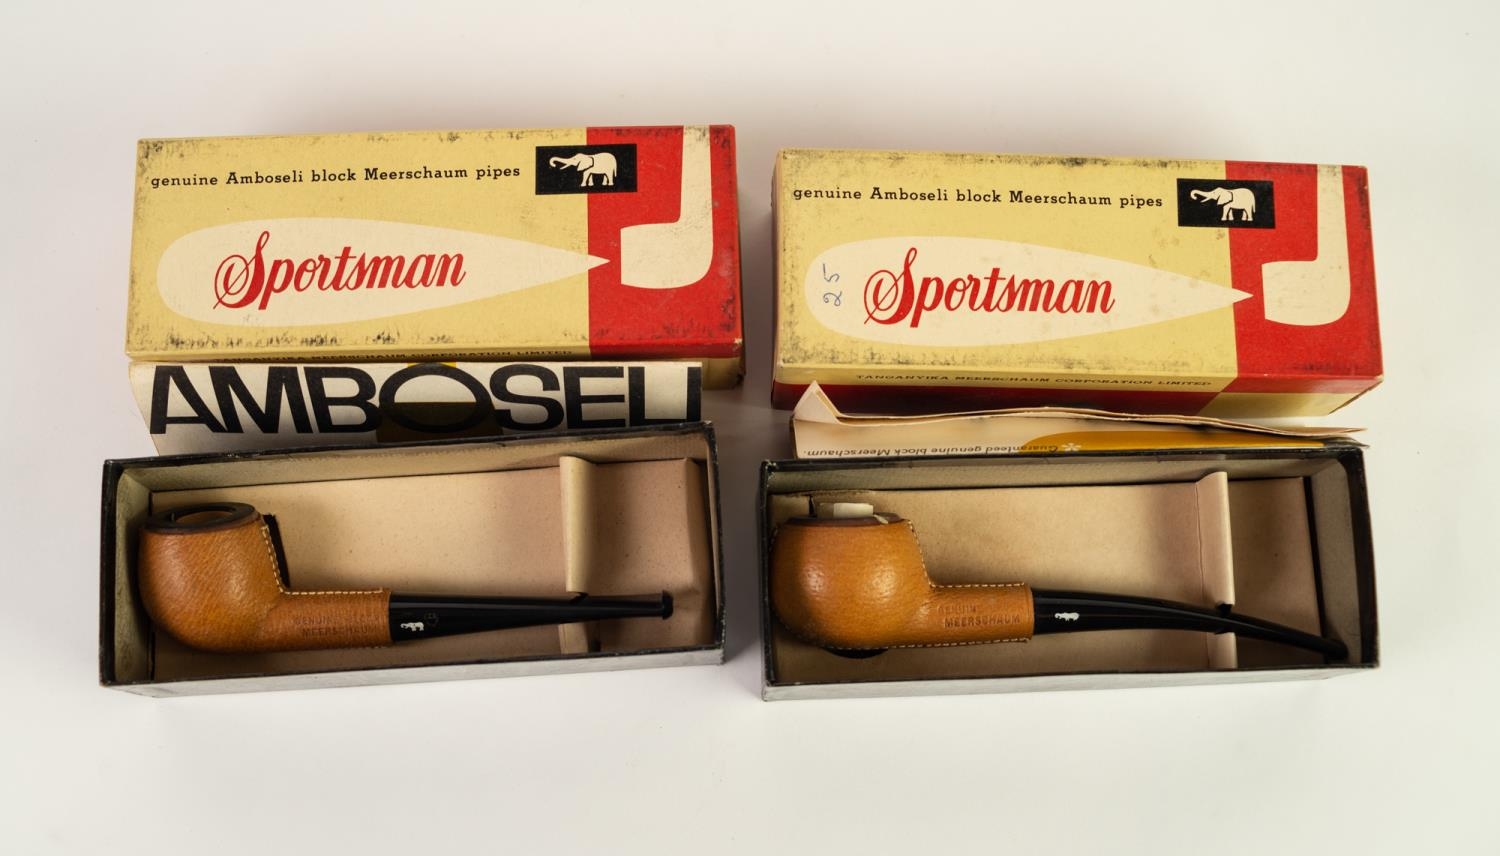 TWO BOXED ?SPORTSMAN? AMBOSELI BLOCK MEERSCHAUM SMOKING PIPES, both with leaflets, the boxed